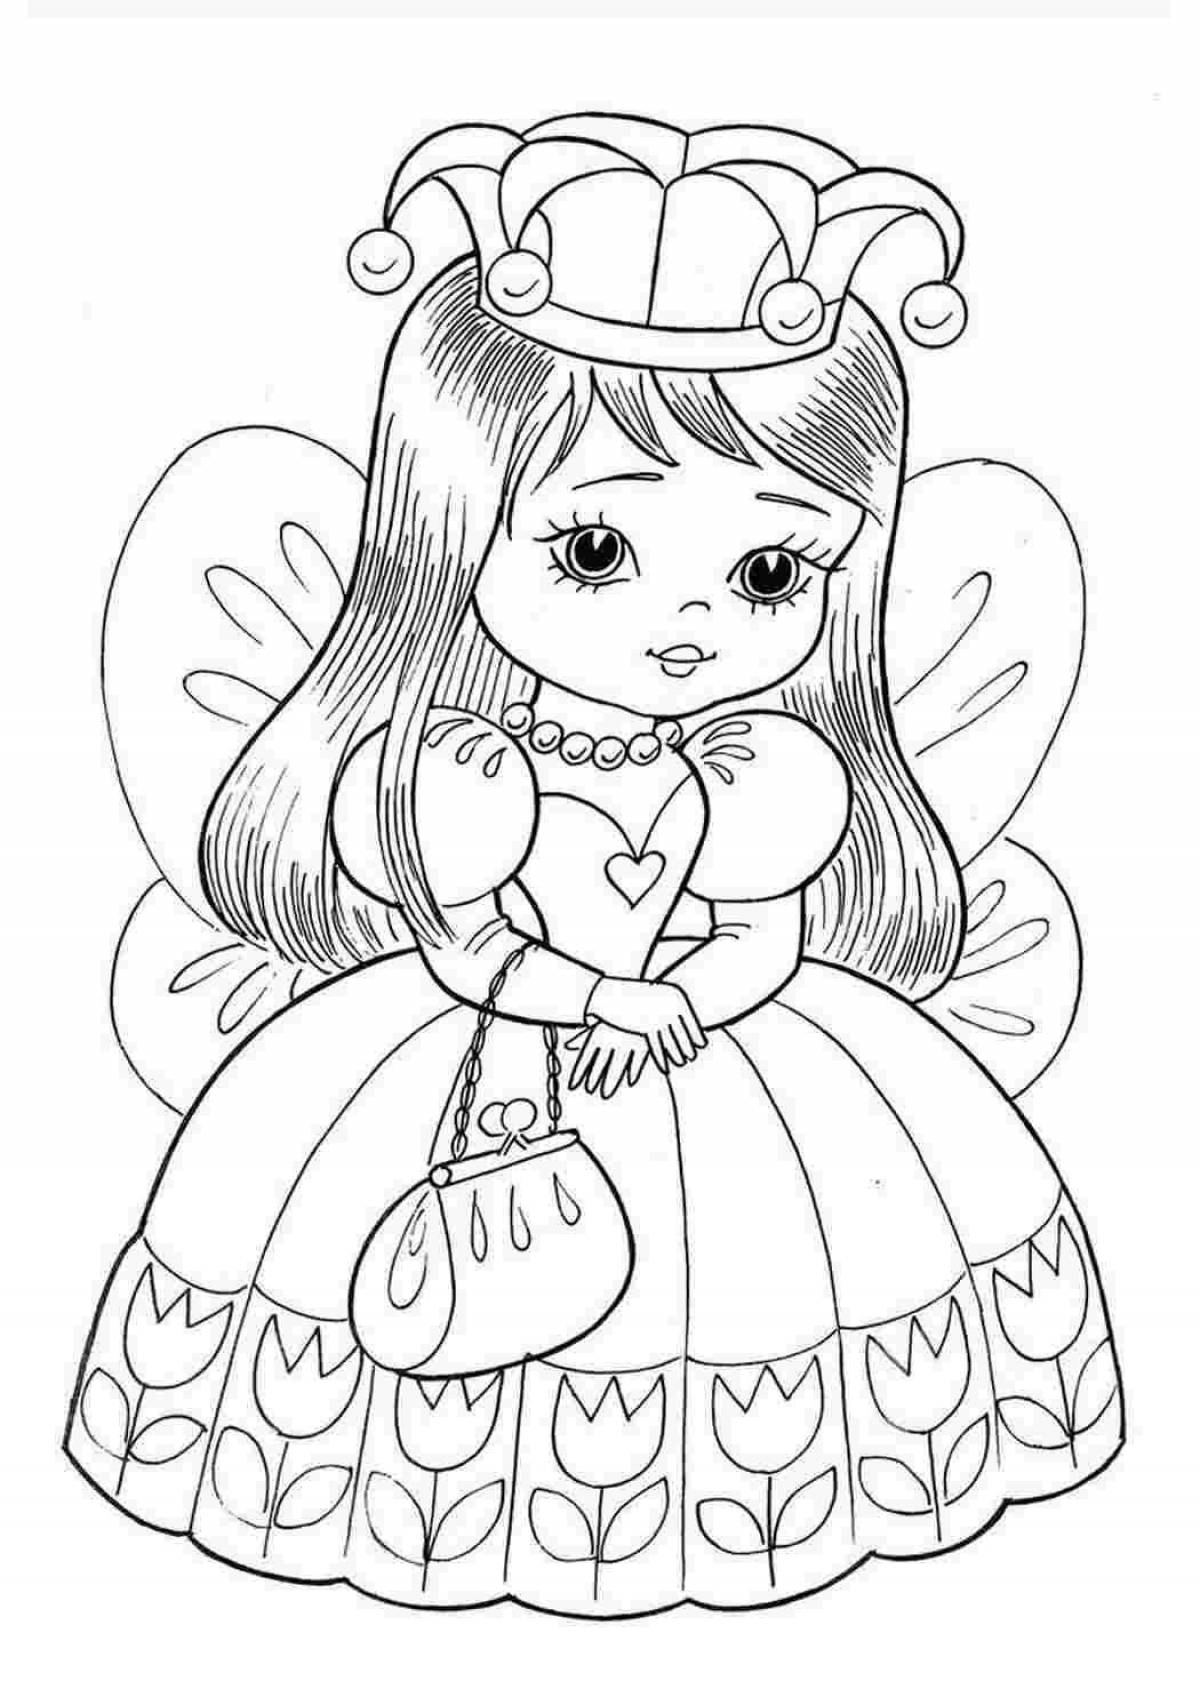 Exotic doll coloring page